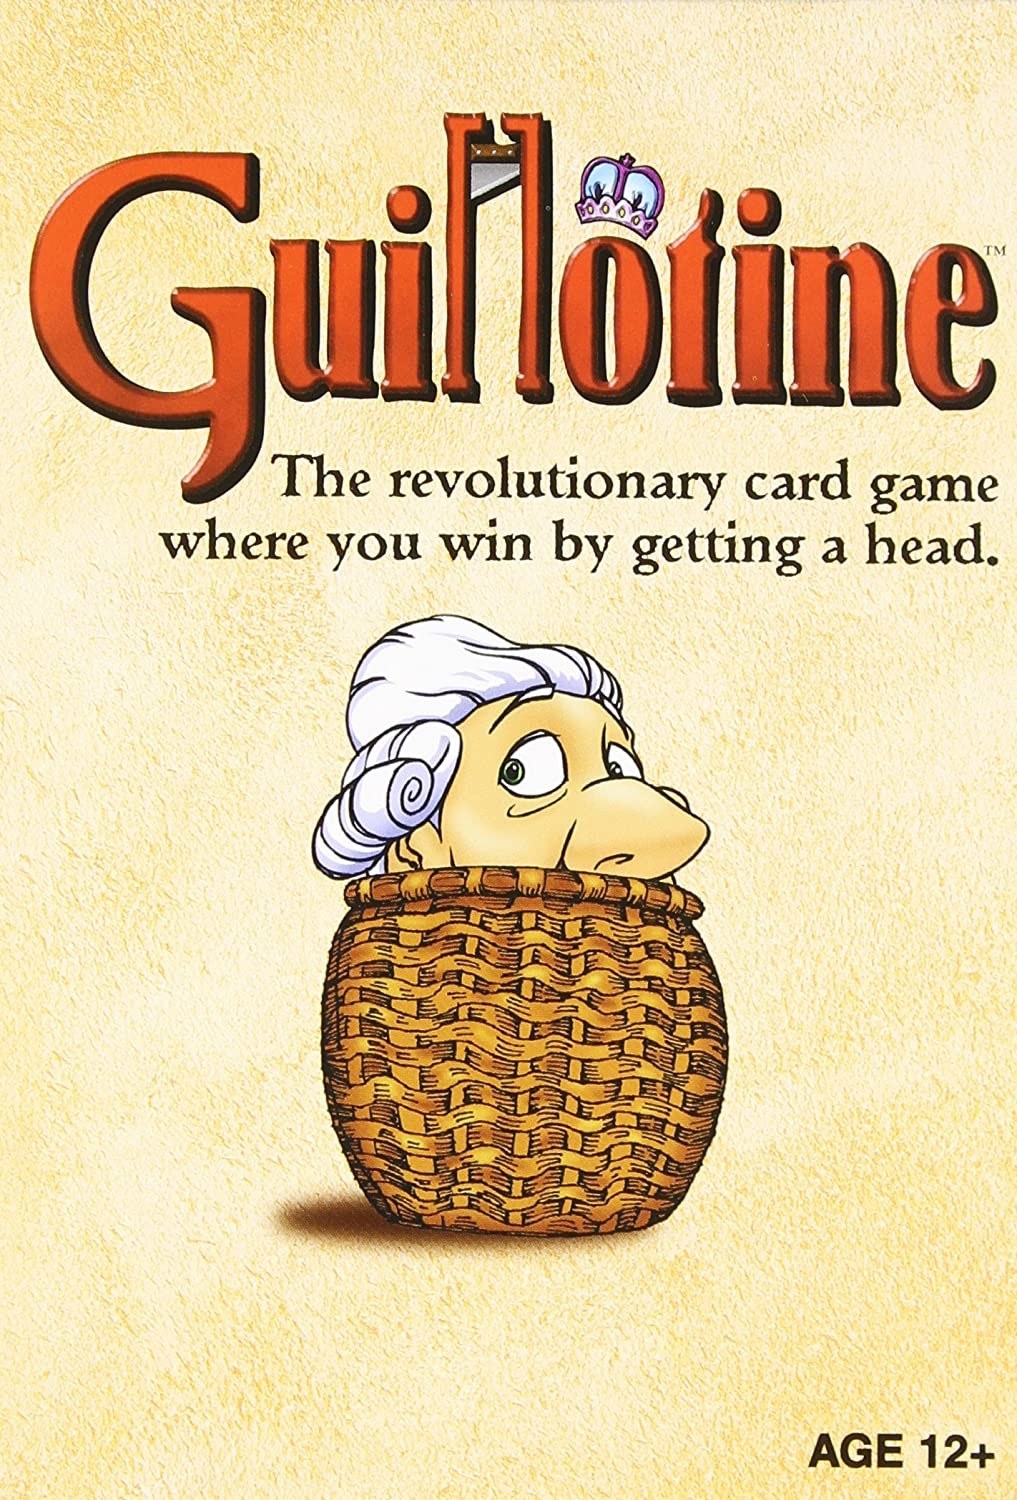 Guillotine promotional image